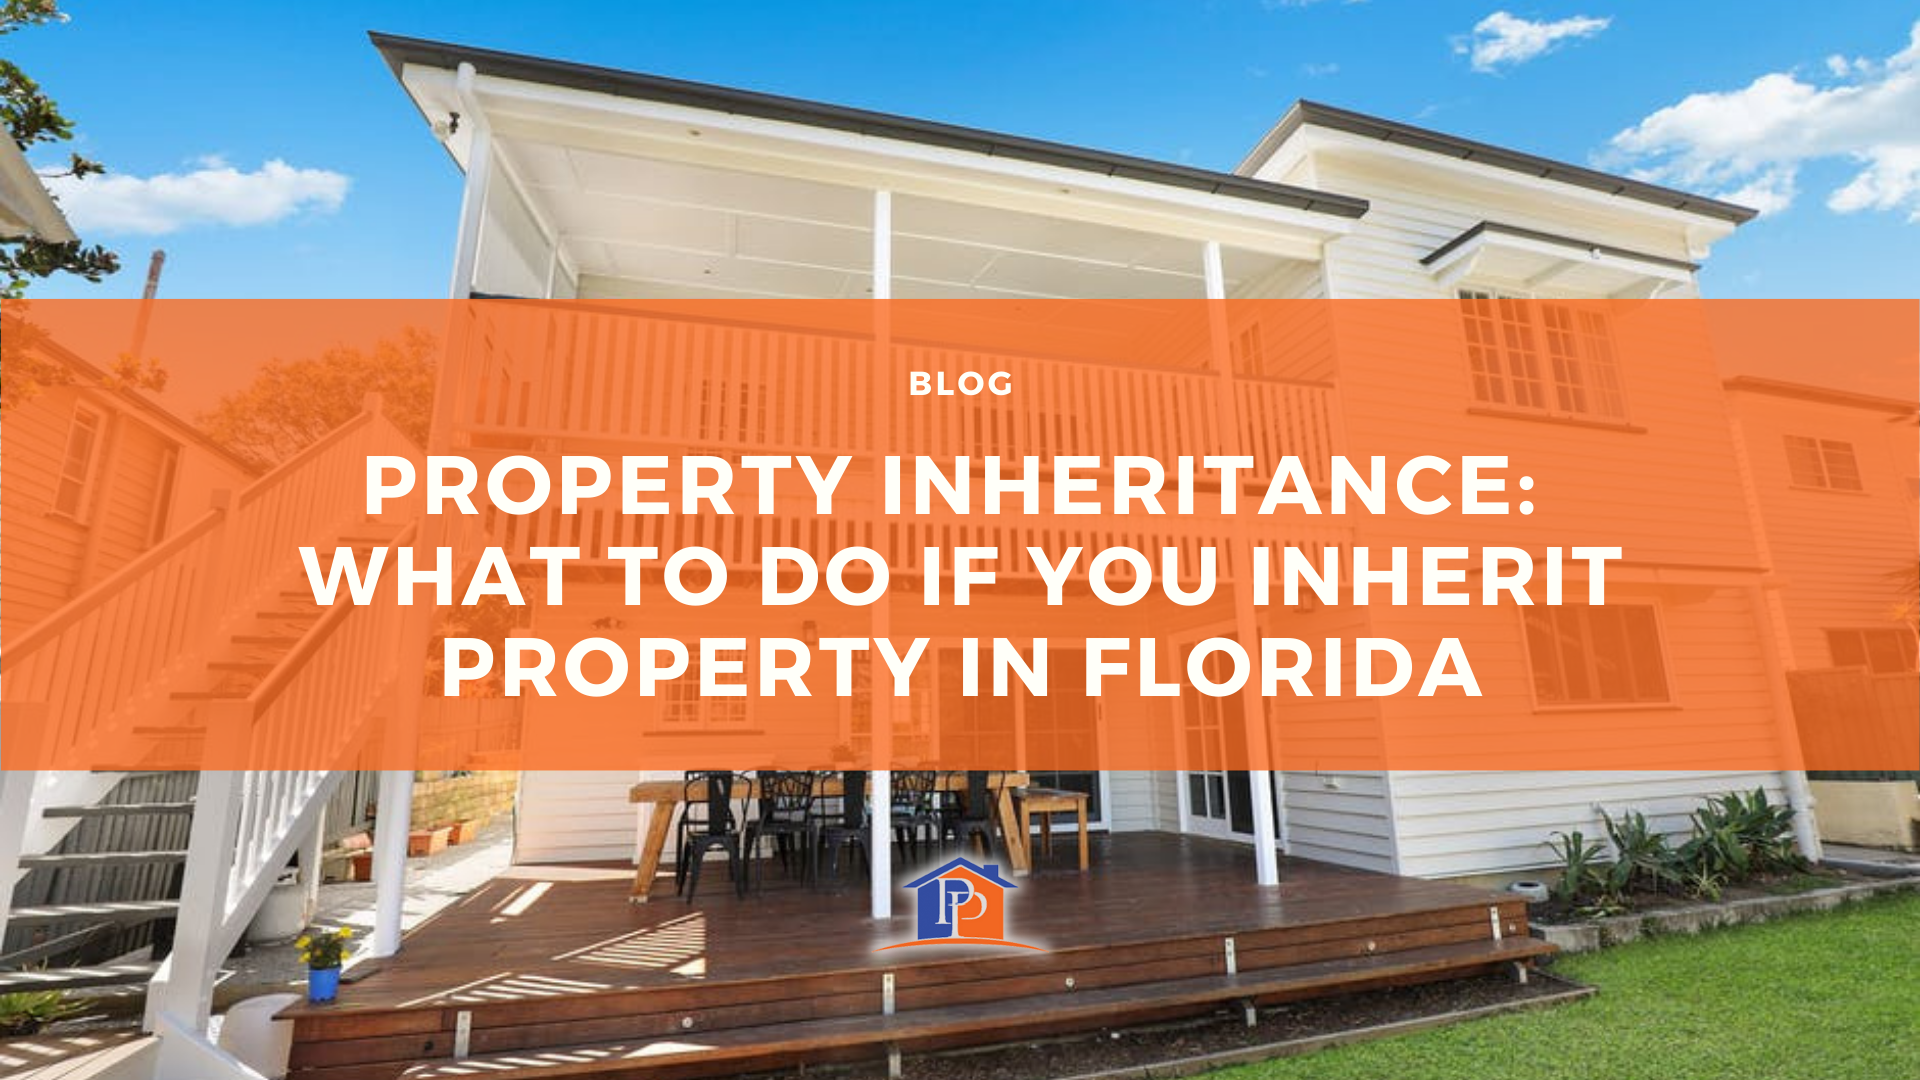 Property Inheritance: What to Do if You Inherit Property in Florida